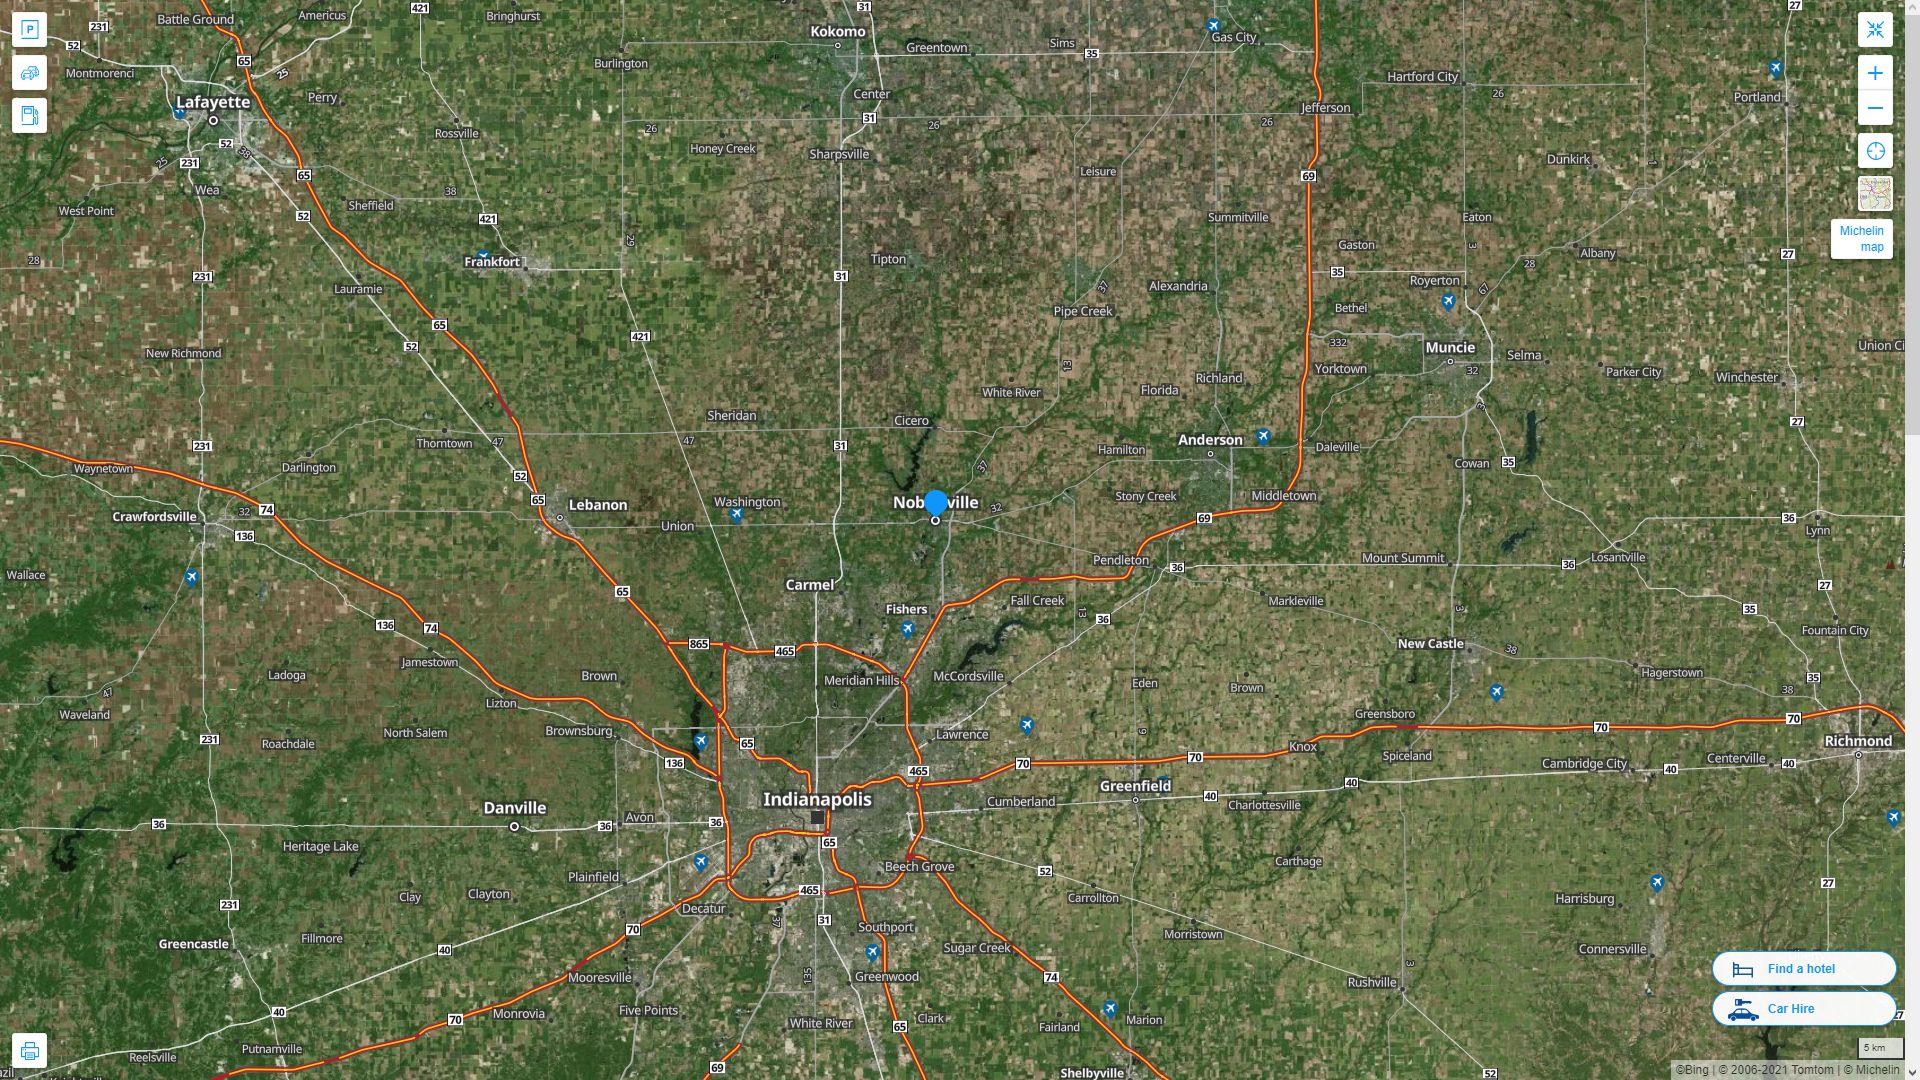 Noblesville Indiana Highway and Road Map with Satellite View